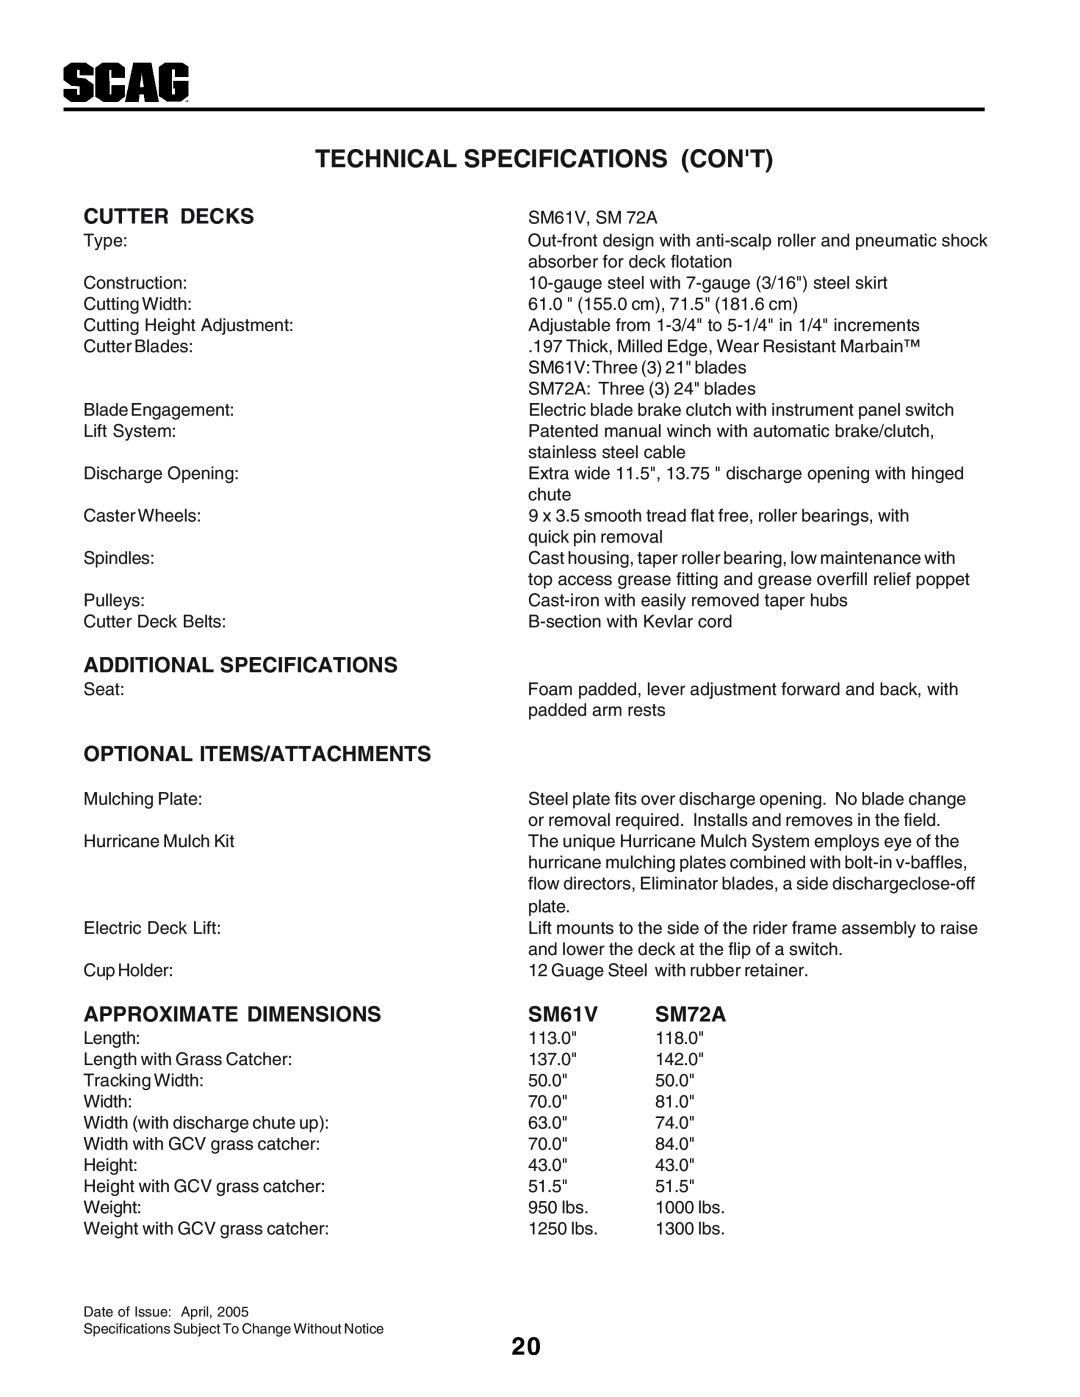 Scag Power Equipment STHM Technical Specifications Cont, Cutter Decks, Additional Specifications, Approximate Dimensions 